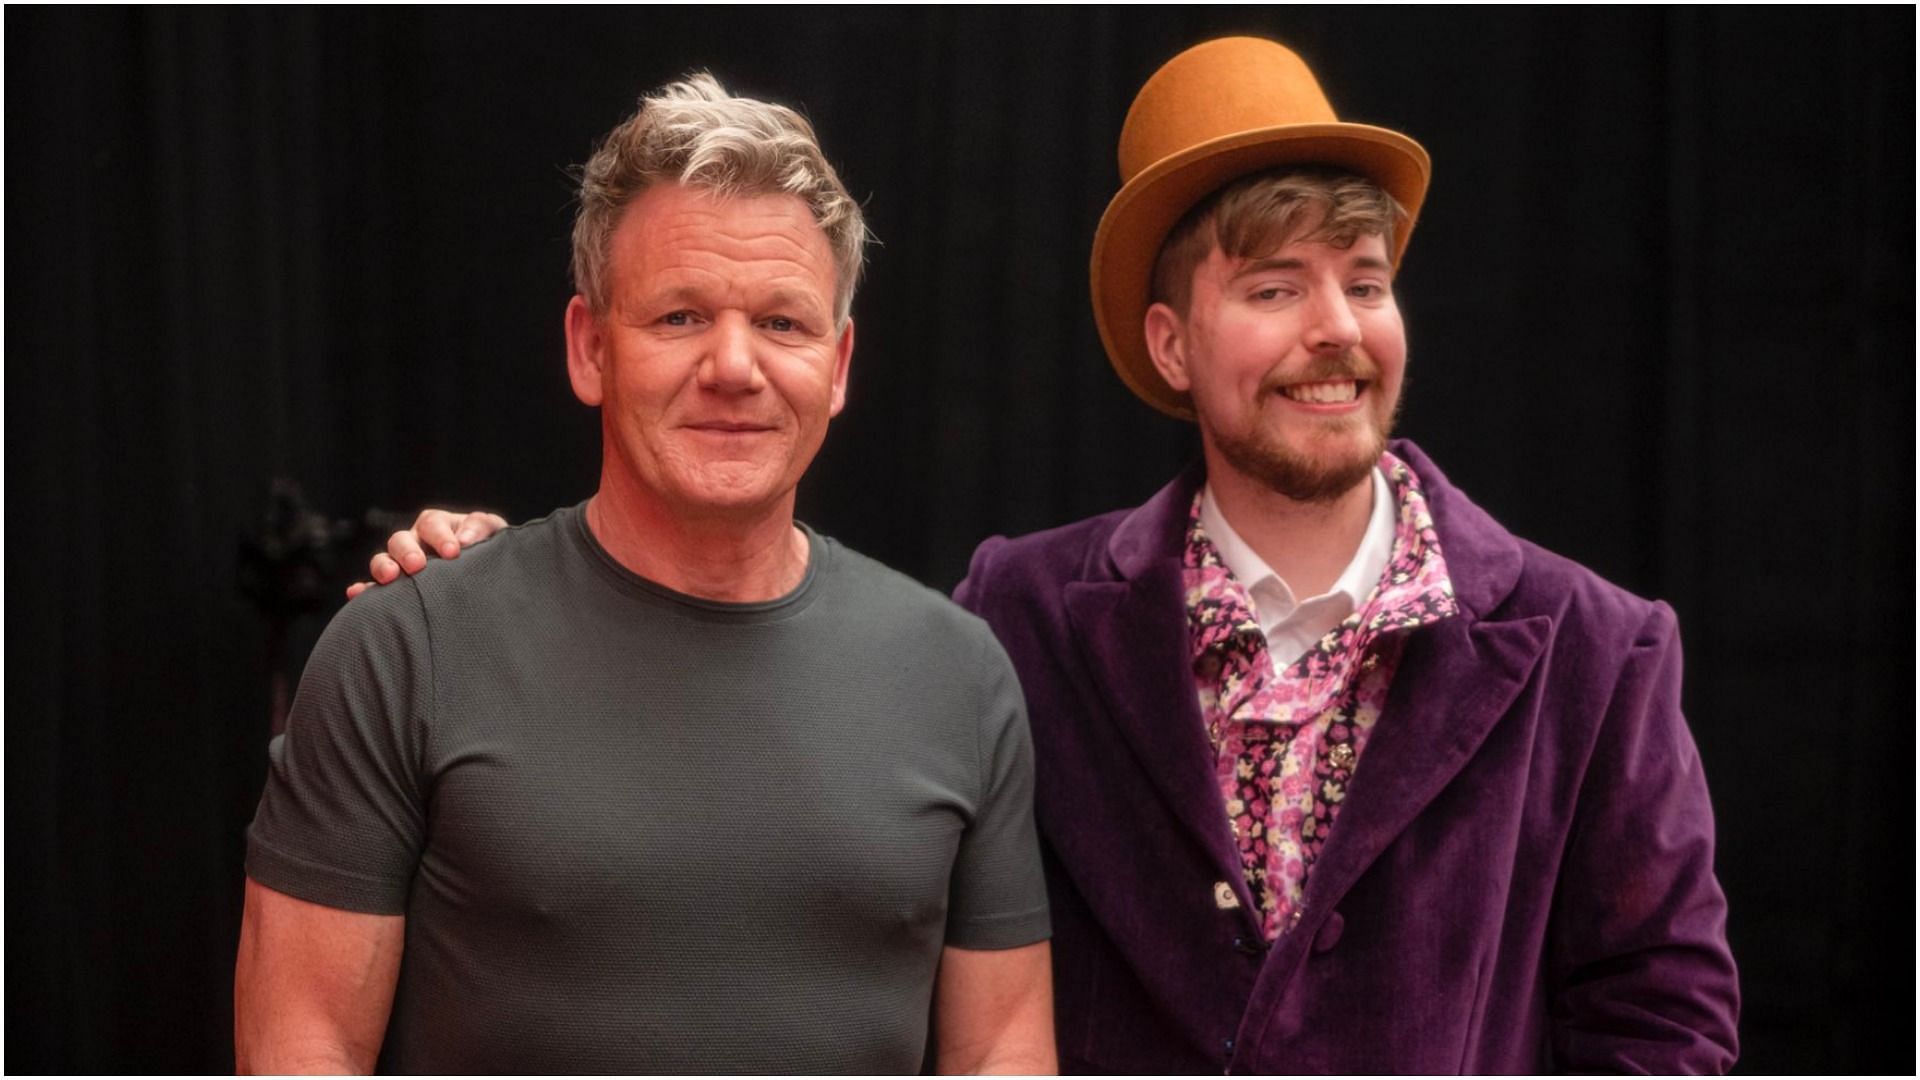 MrBeast partnered with Gordon Ramsay in his latest video, giving away a chocolate factory in a competition (Image via MrBeast/Twitter)